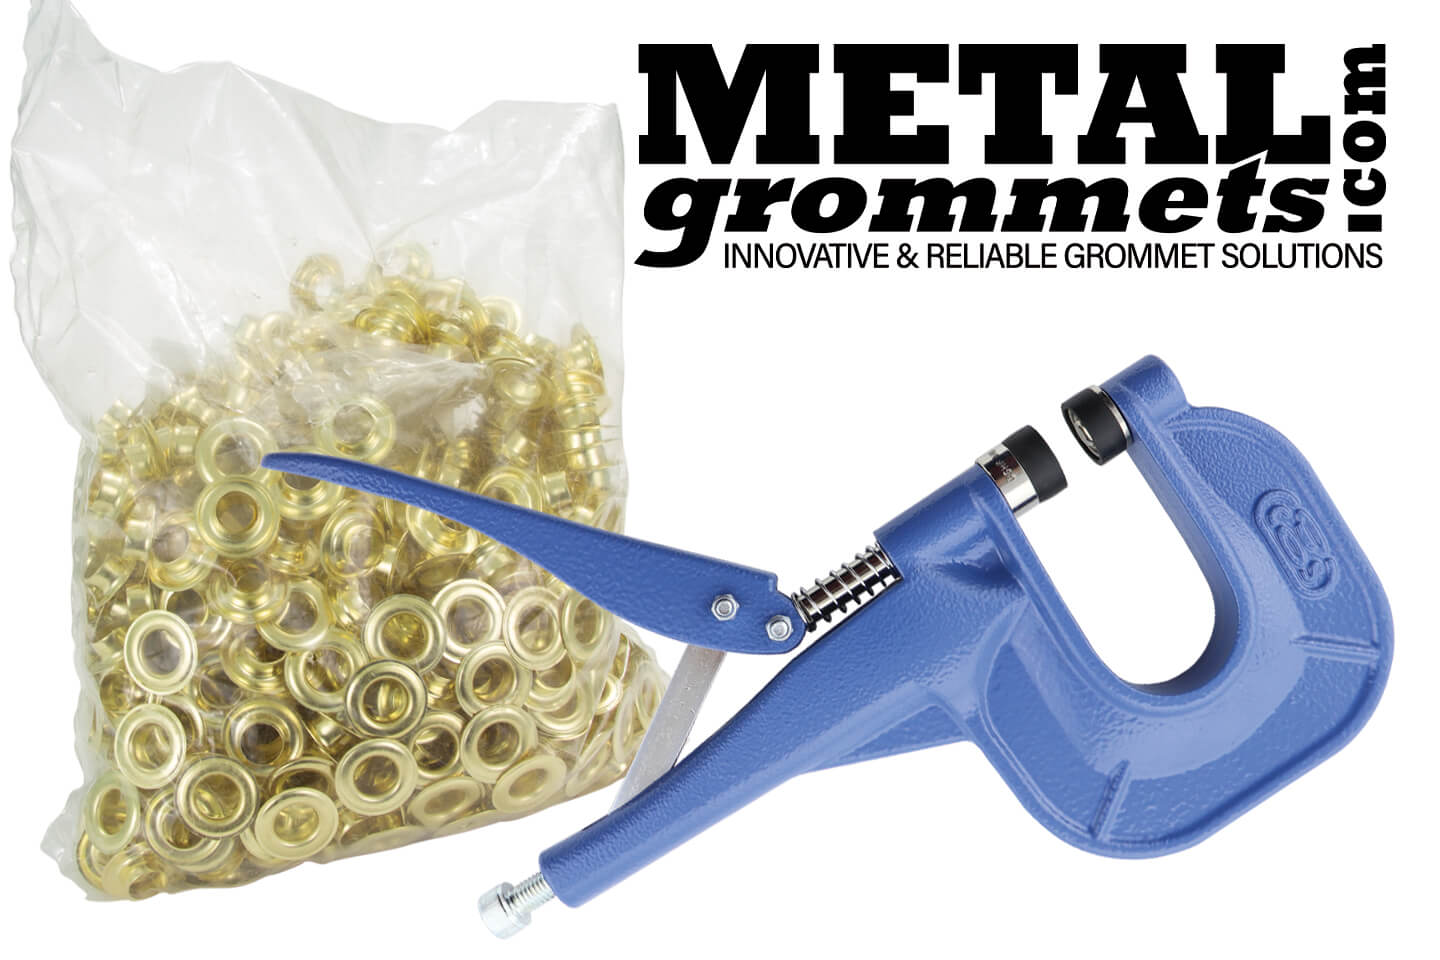 Metal Grommets (Eyelets) : Simple tools and ways to set them on